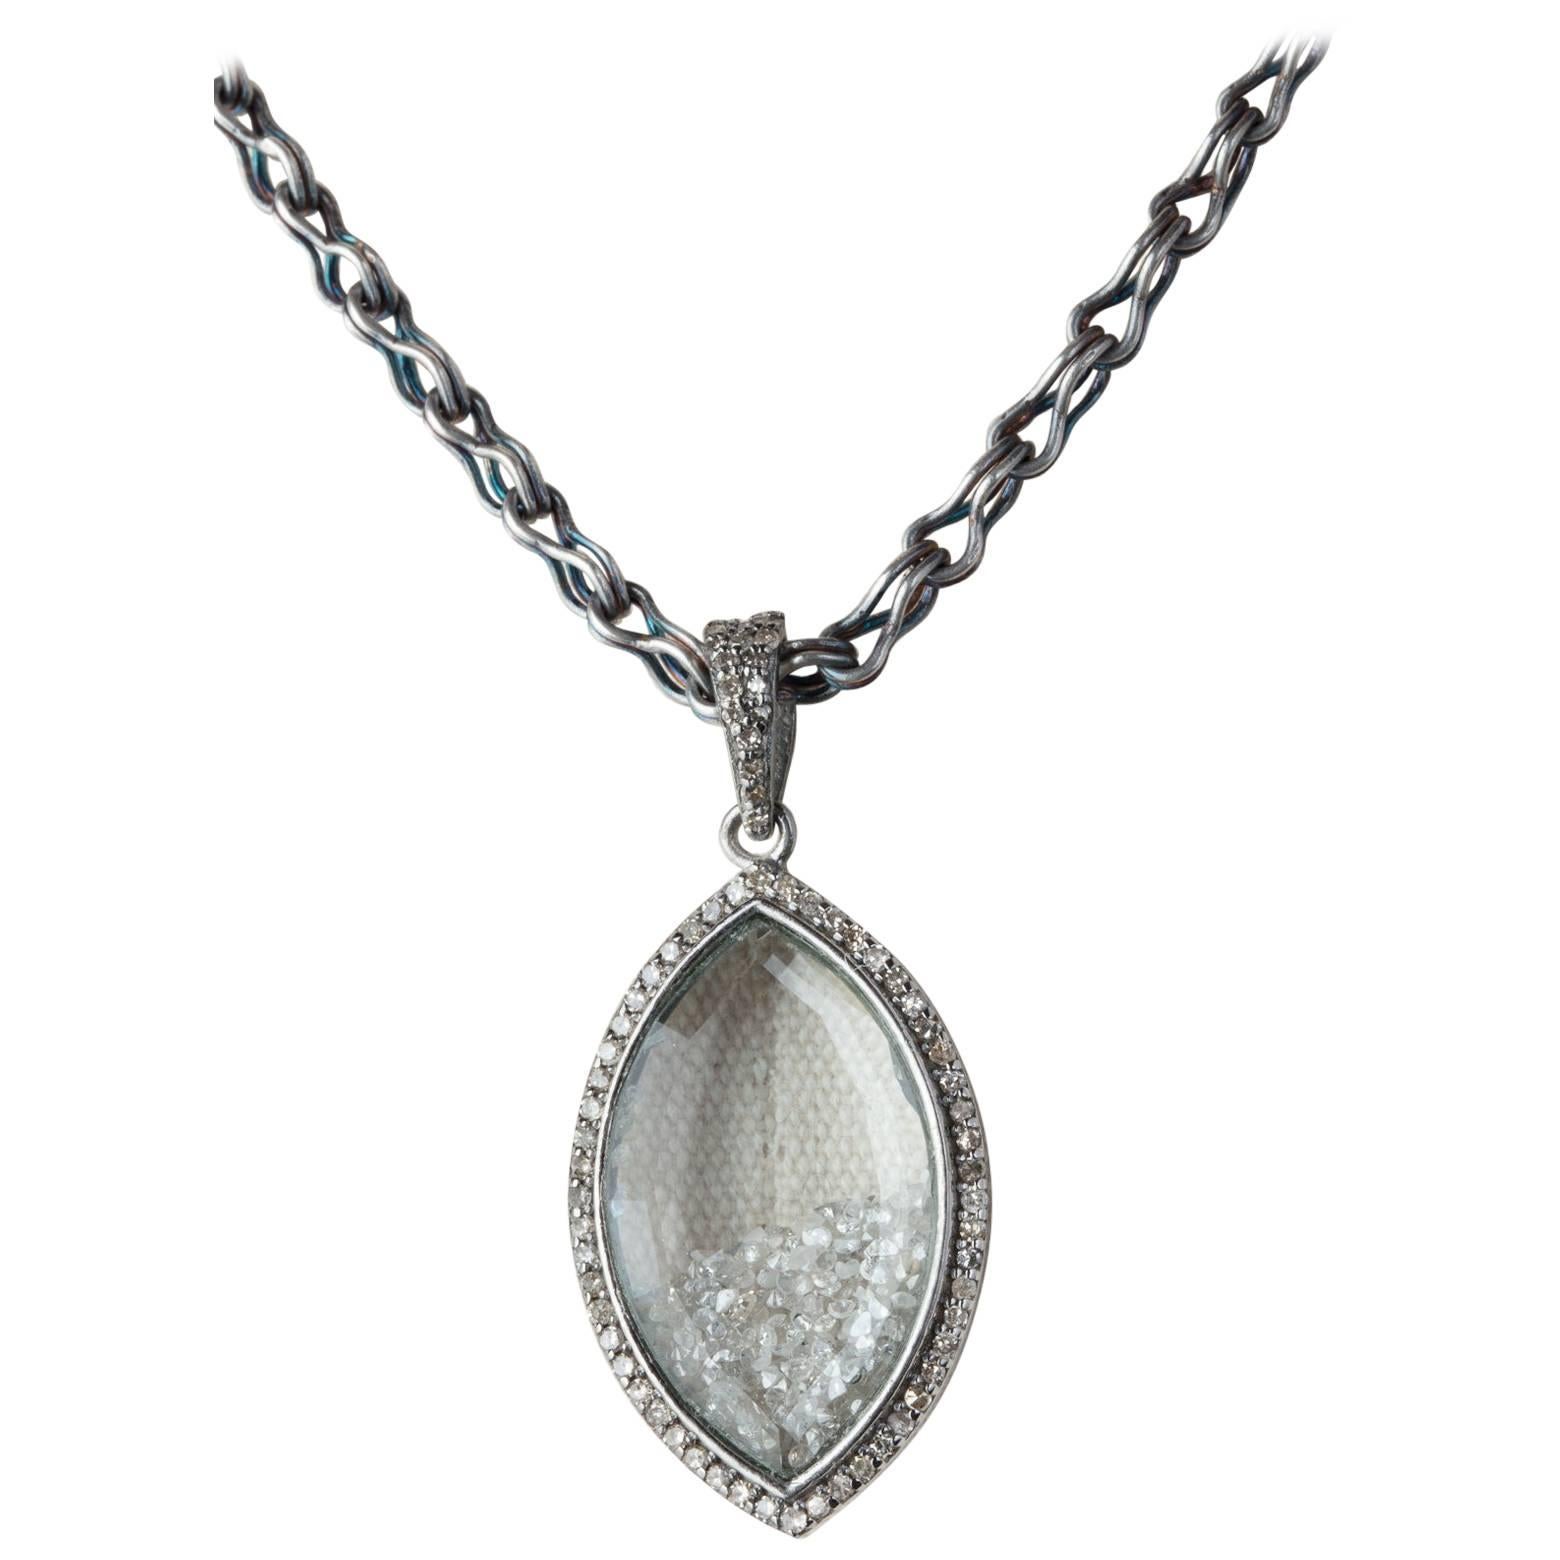 Marquise-Shaped Glass Pendant with Loose Diamonds on Very Long Silver Chain